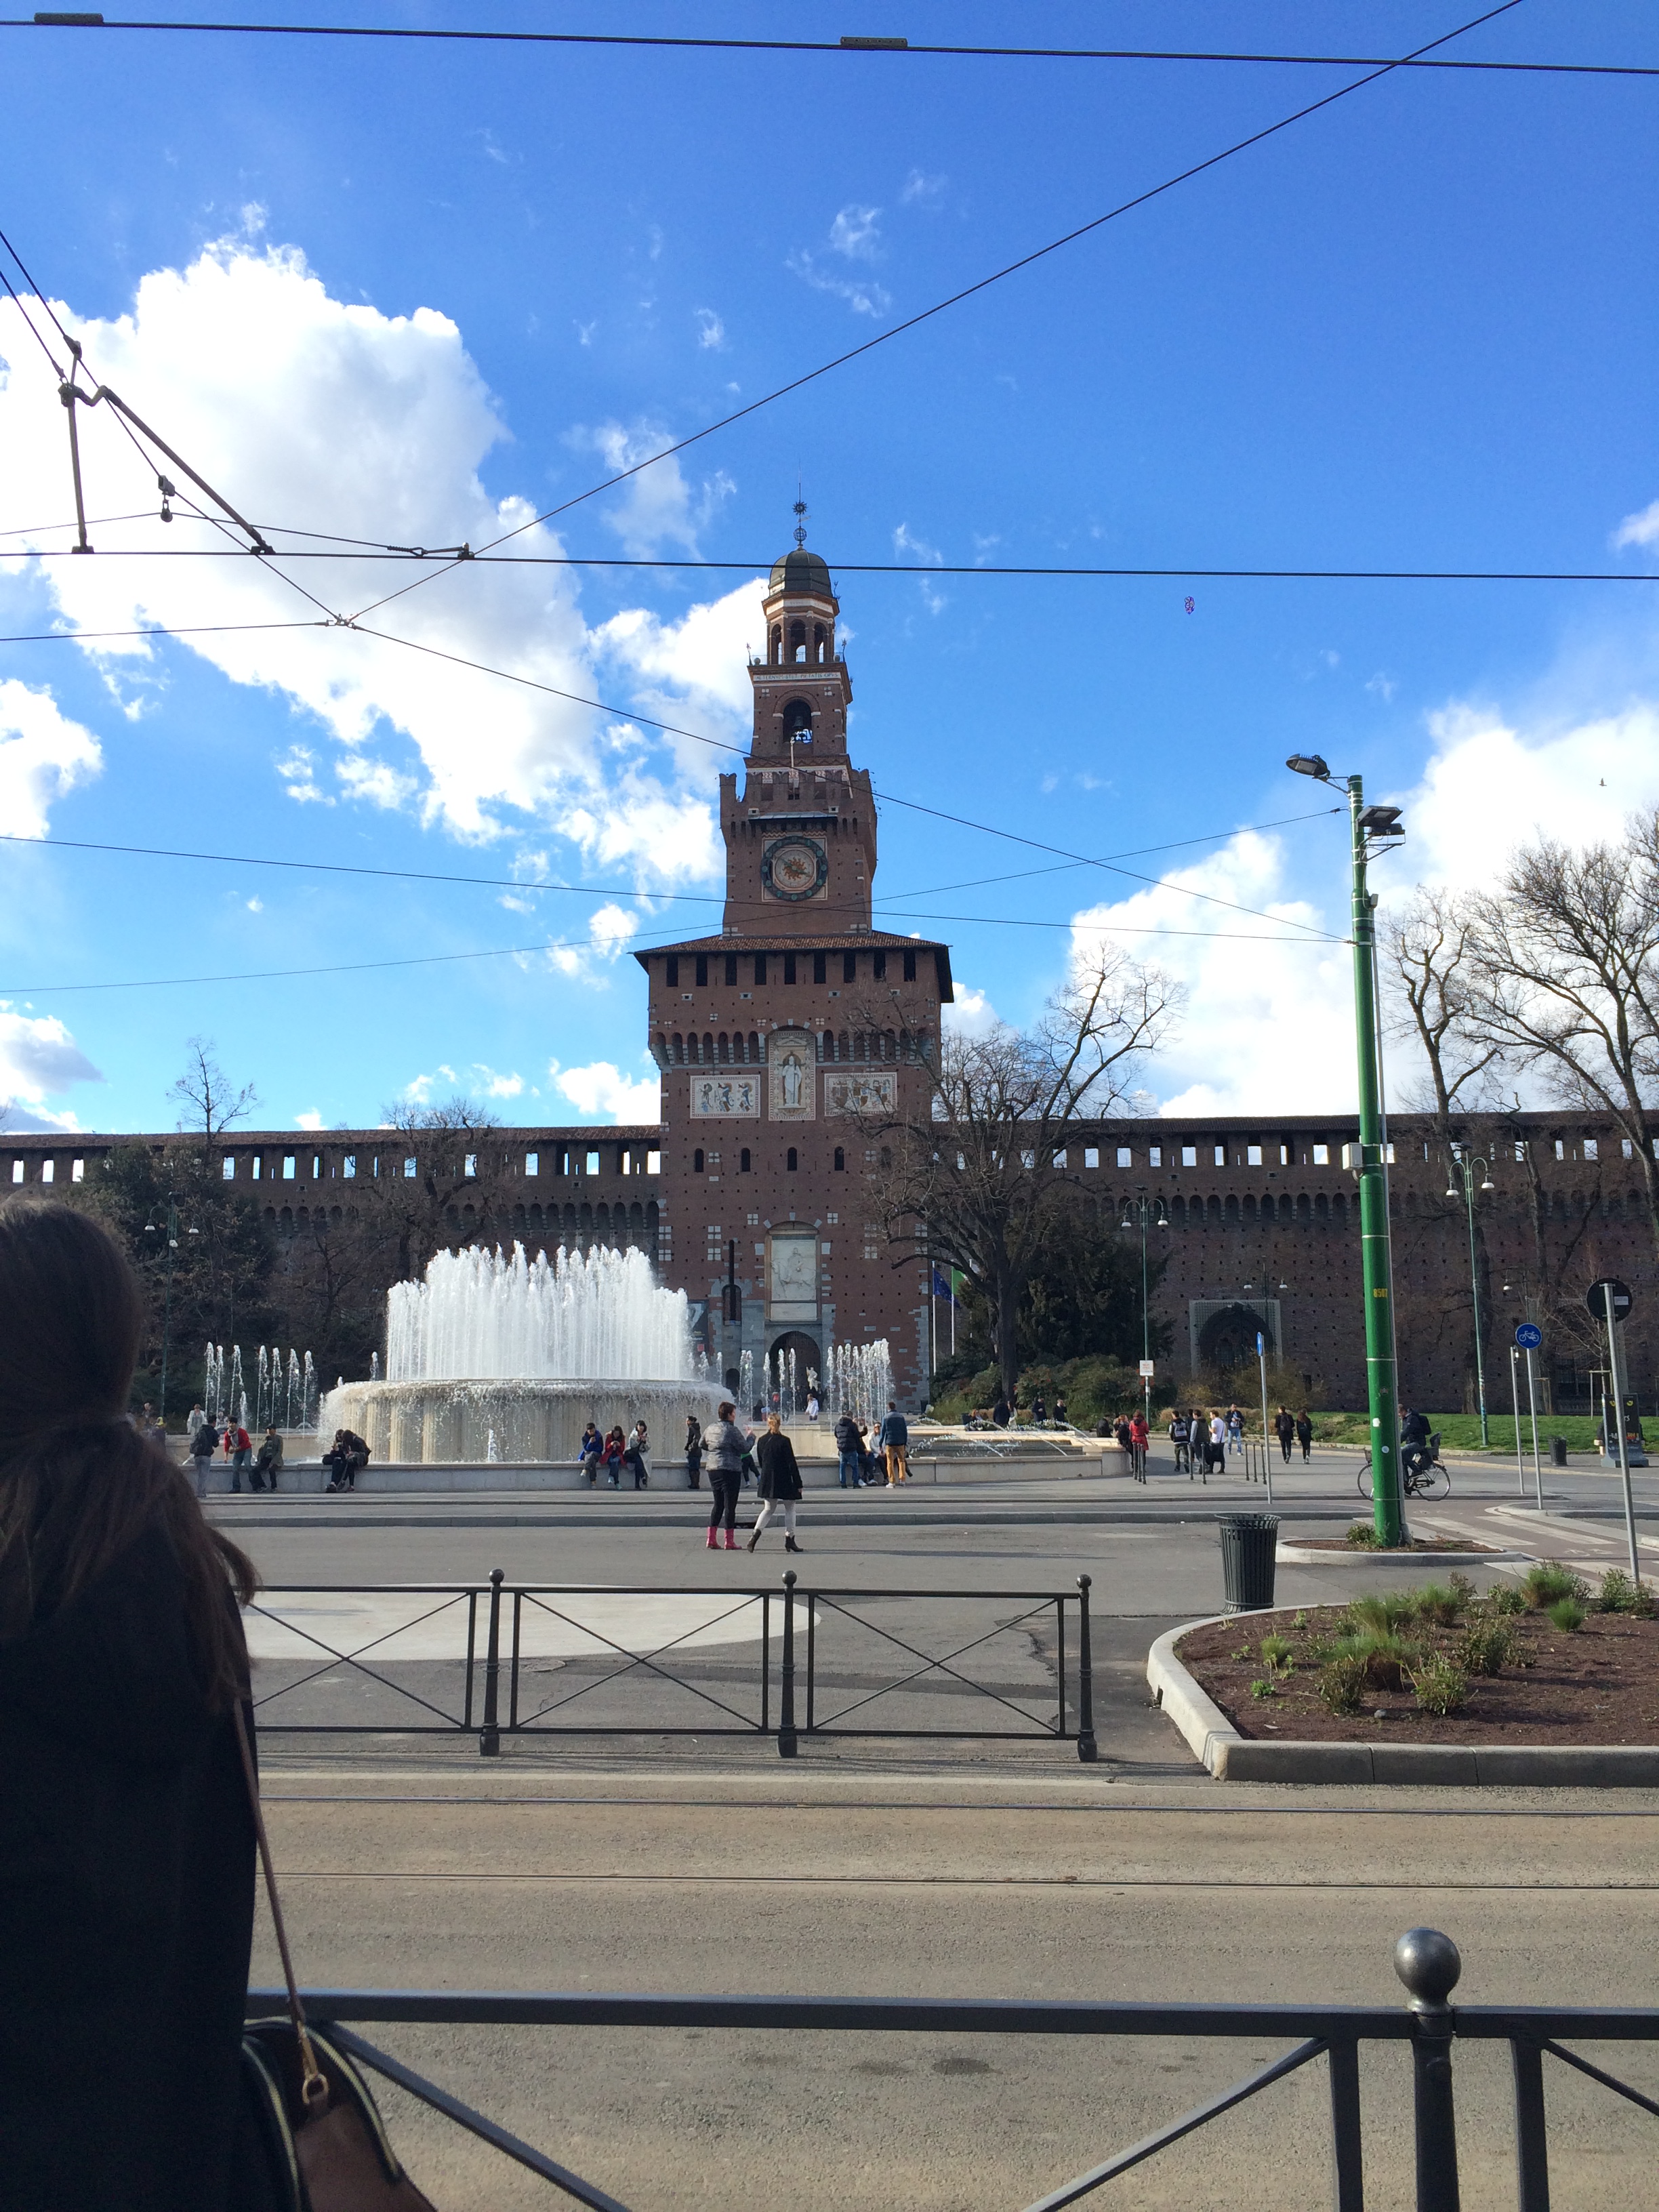 Image of the Sforza Castle in Milan, Italy